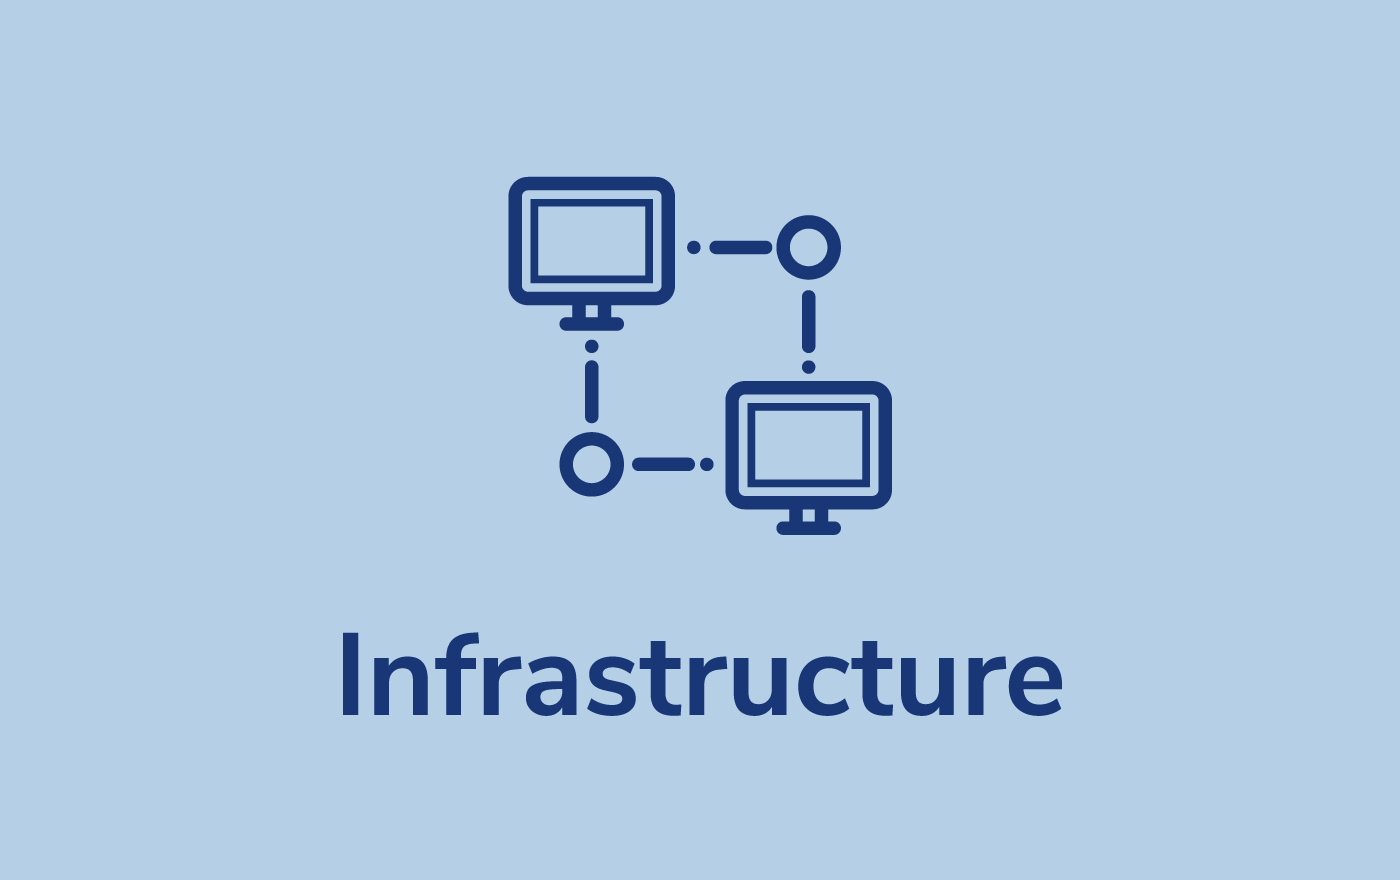 Infrastructure Overview